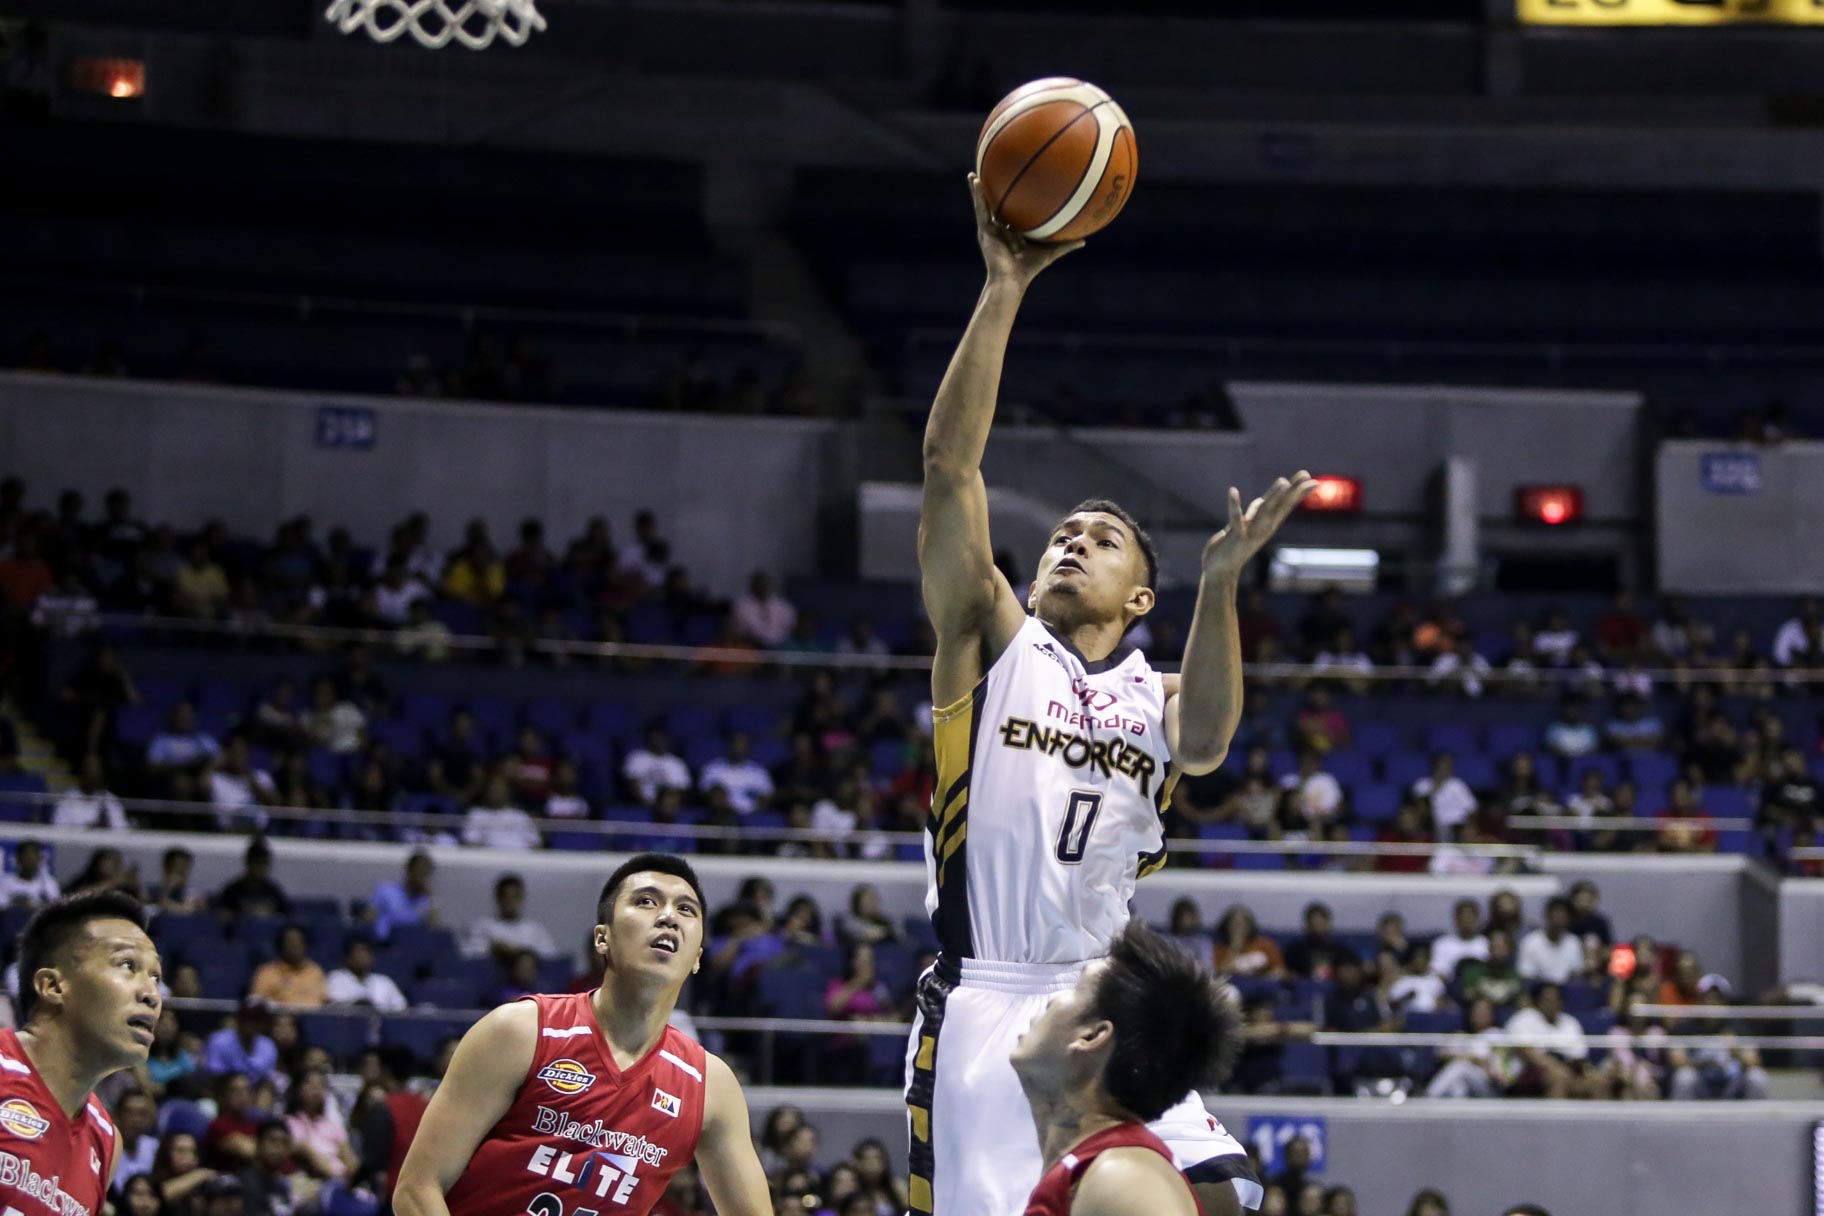 Paolo Taha. Photo by Tristan Tamayo/INQUIRER.net